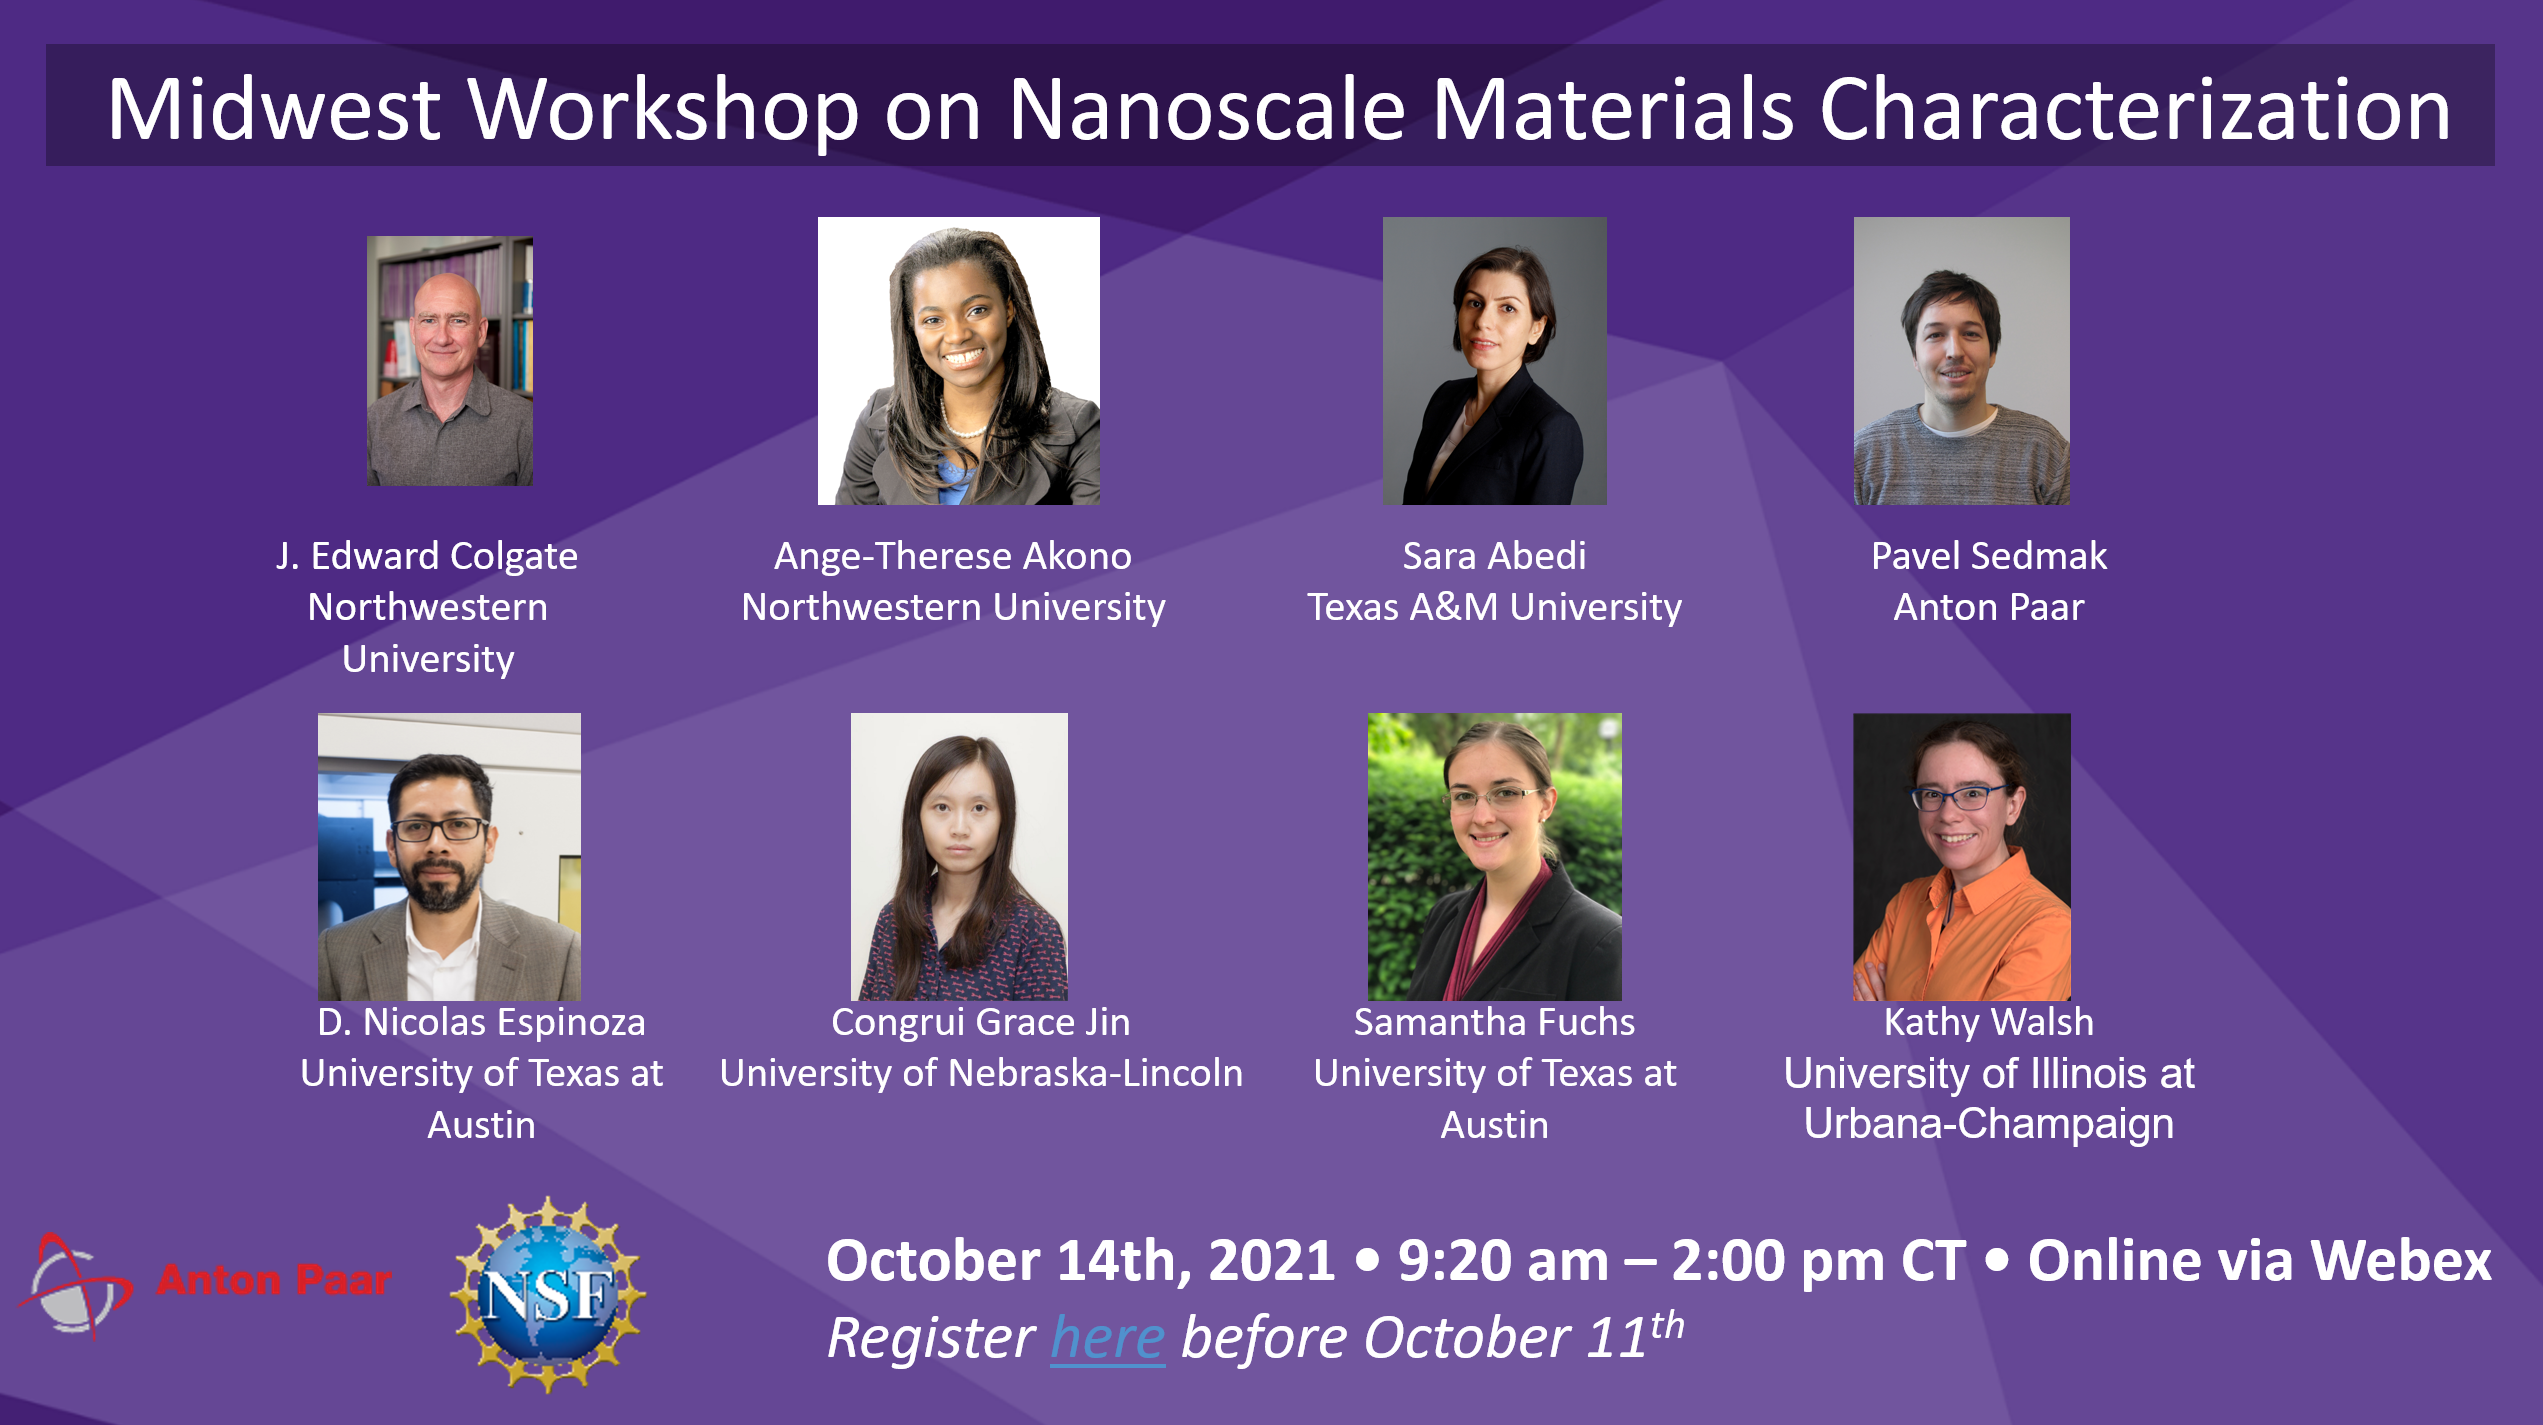 Midwest Workshop on Nanoscale Materials Characterization